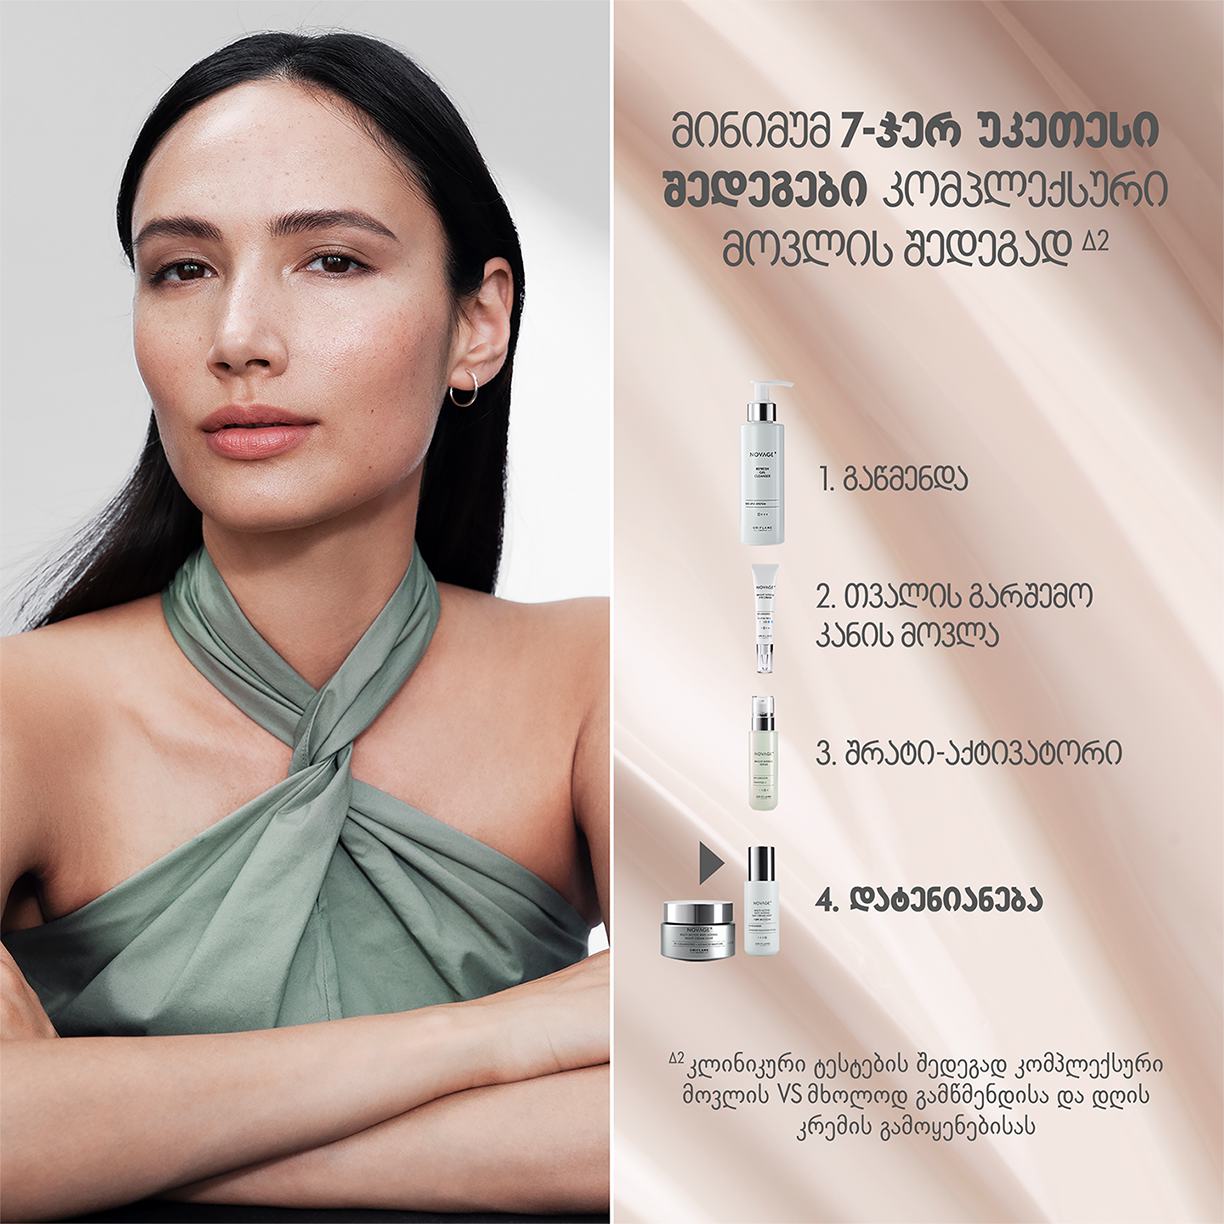 https://media-cdn.oriflame.com/productImage?externalMediaId=product-management-media%2fProducts%2f41057%2fGE%2f41057_9.png&id=17748288&version=1